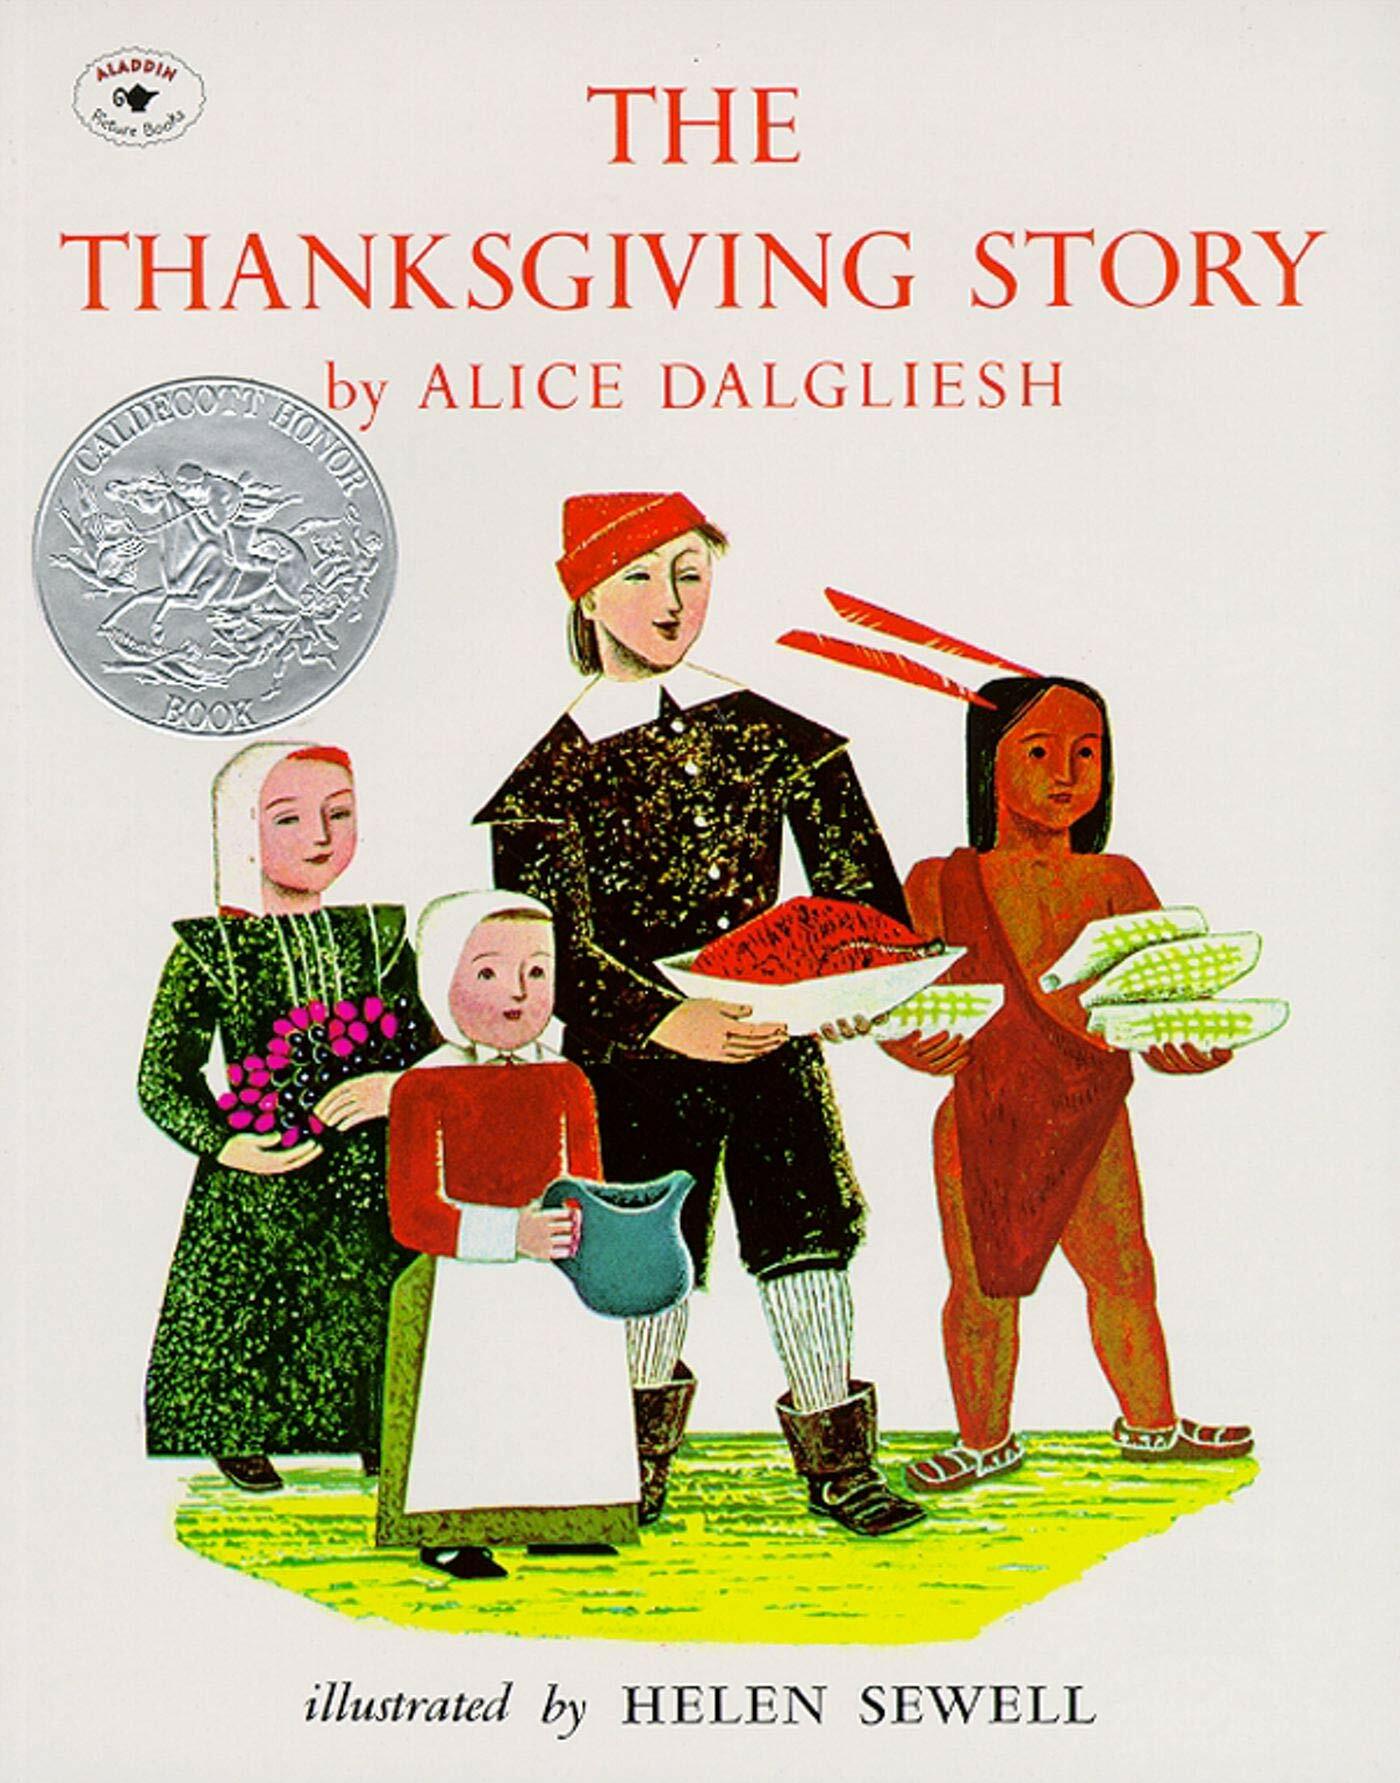 (The)Thanksgiving story